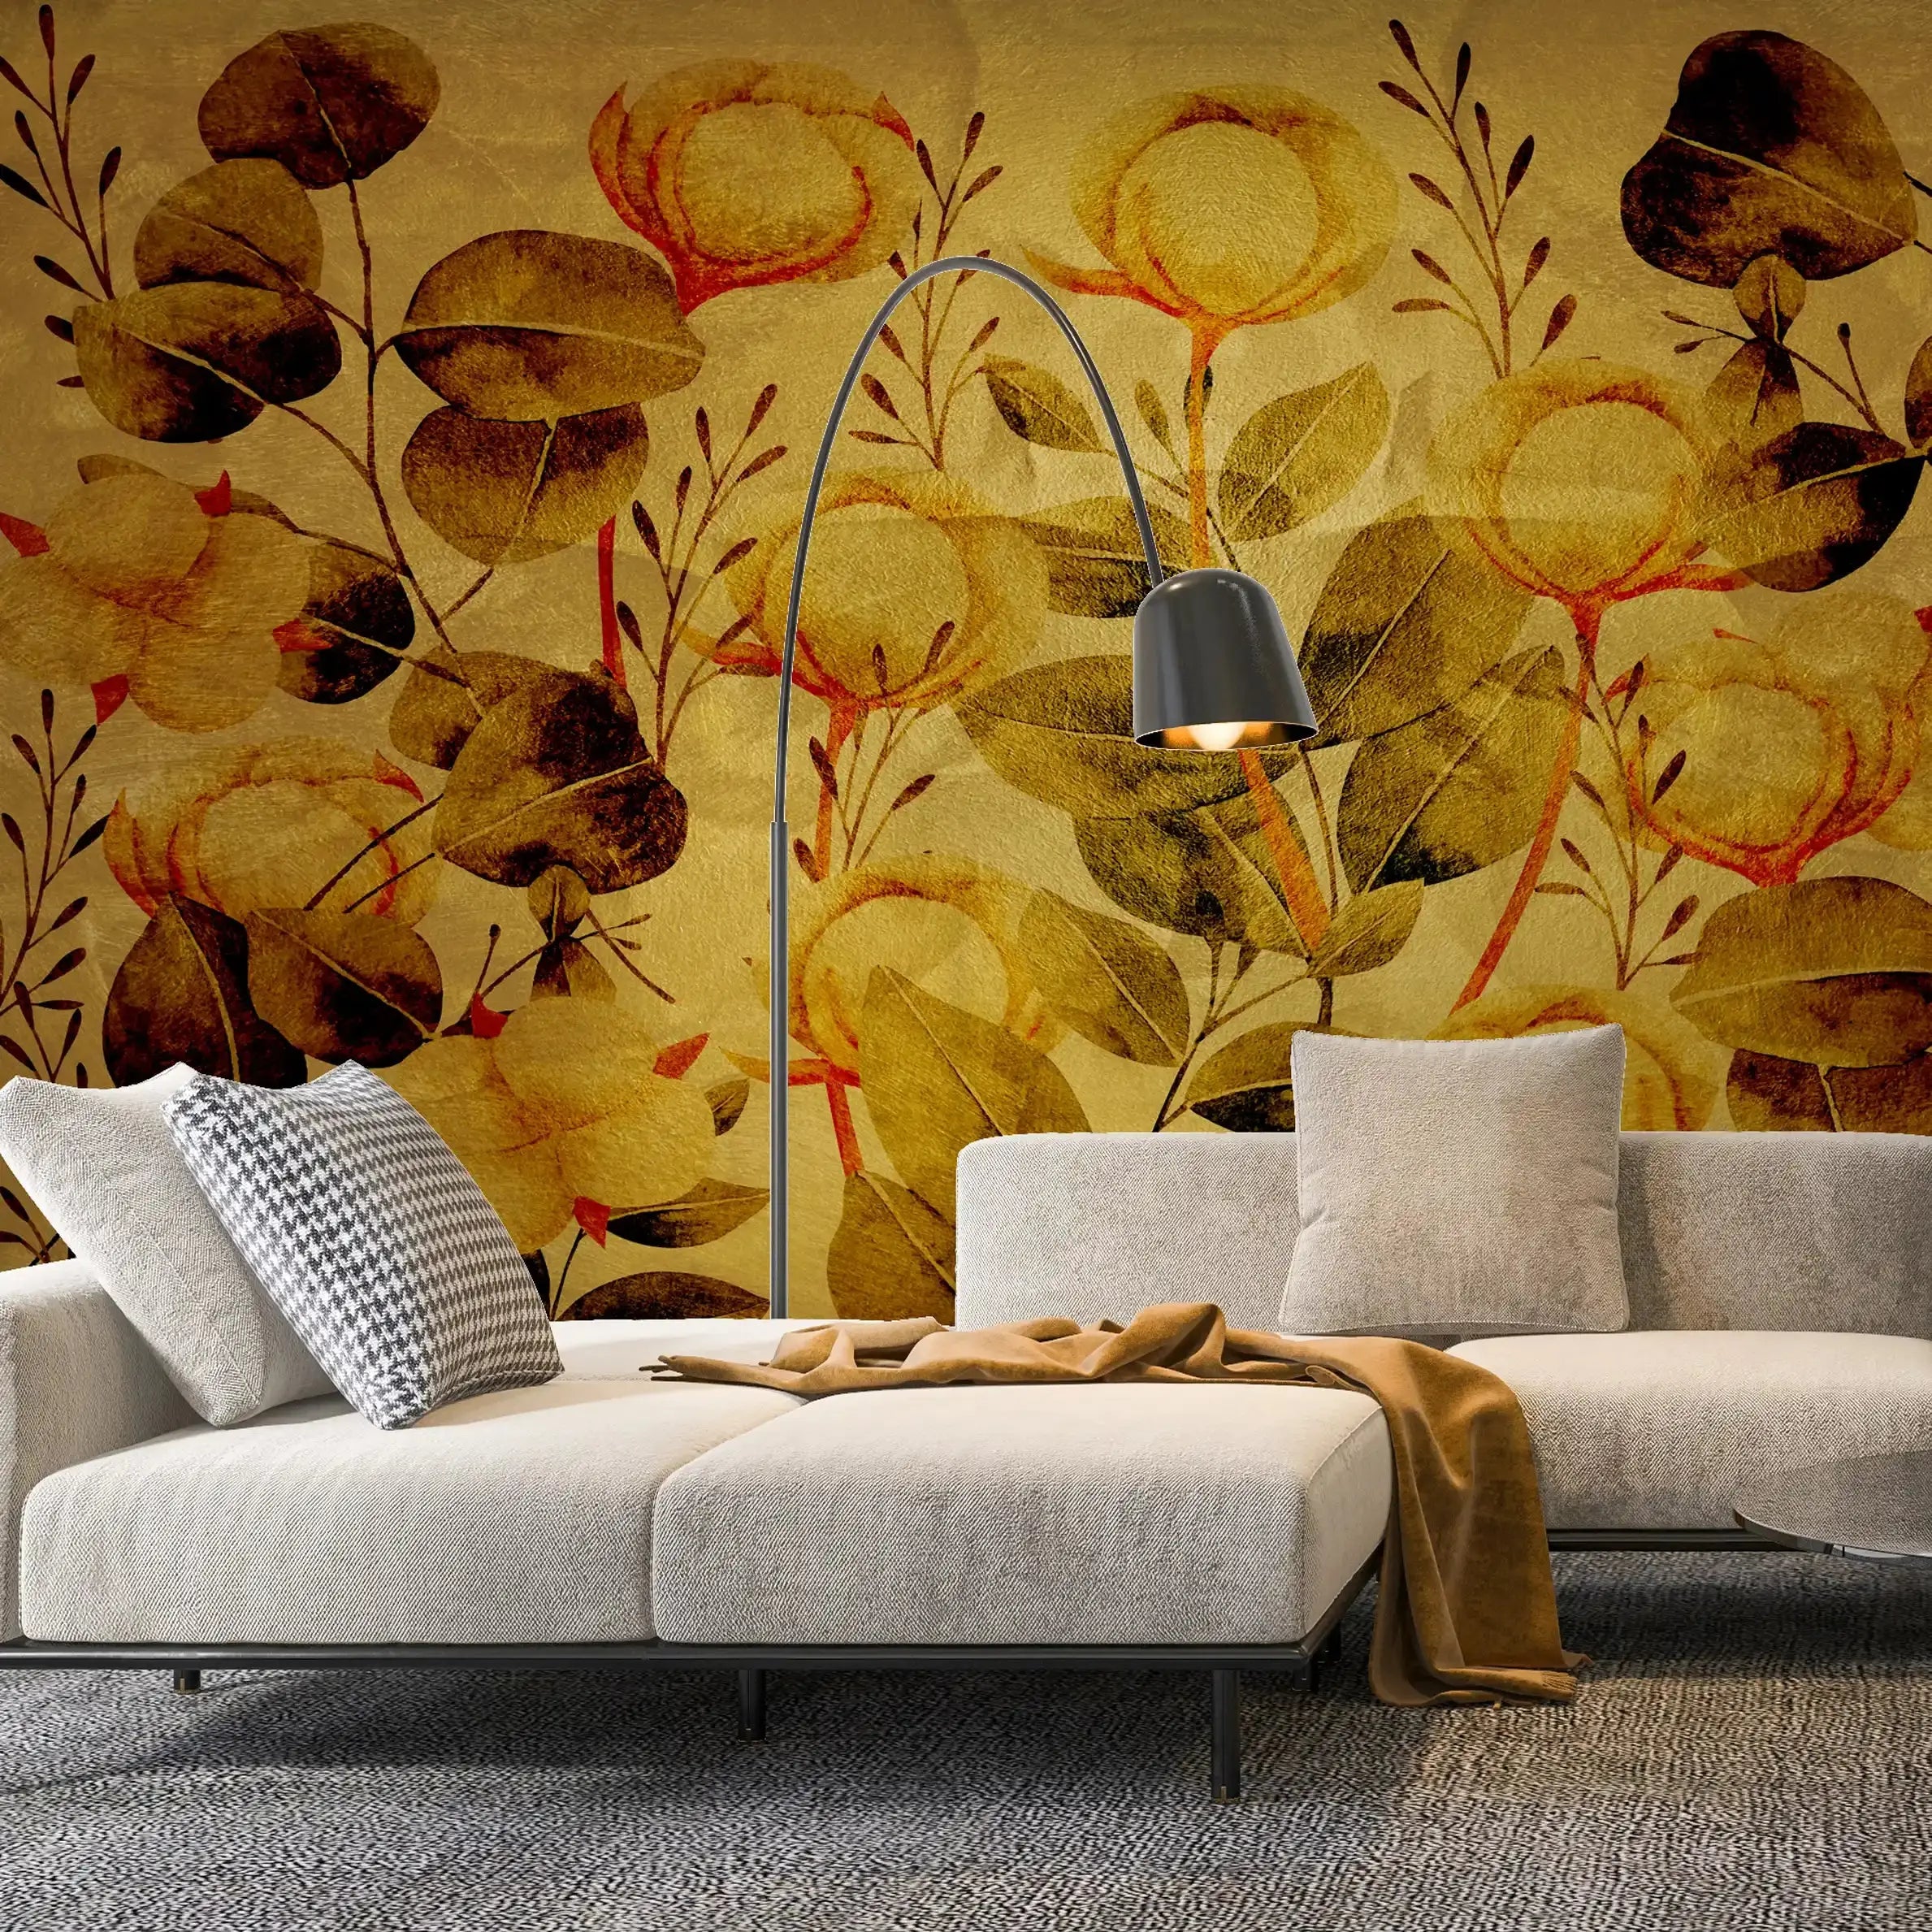 3035-D / Floral Wall Decor: Peelable, Stickable Wallpaper with Tulips Design on Gold Background, Ideal for Room Decor - Artevella